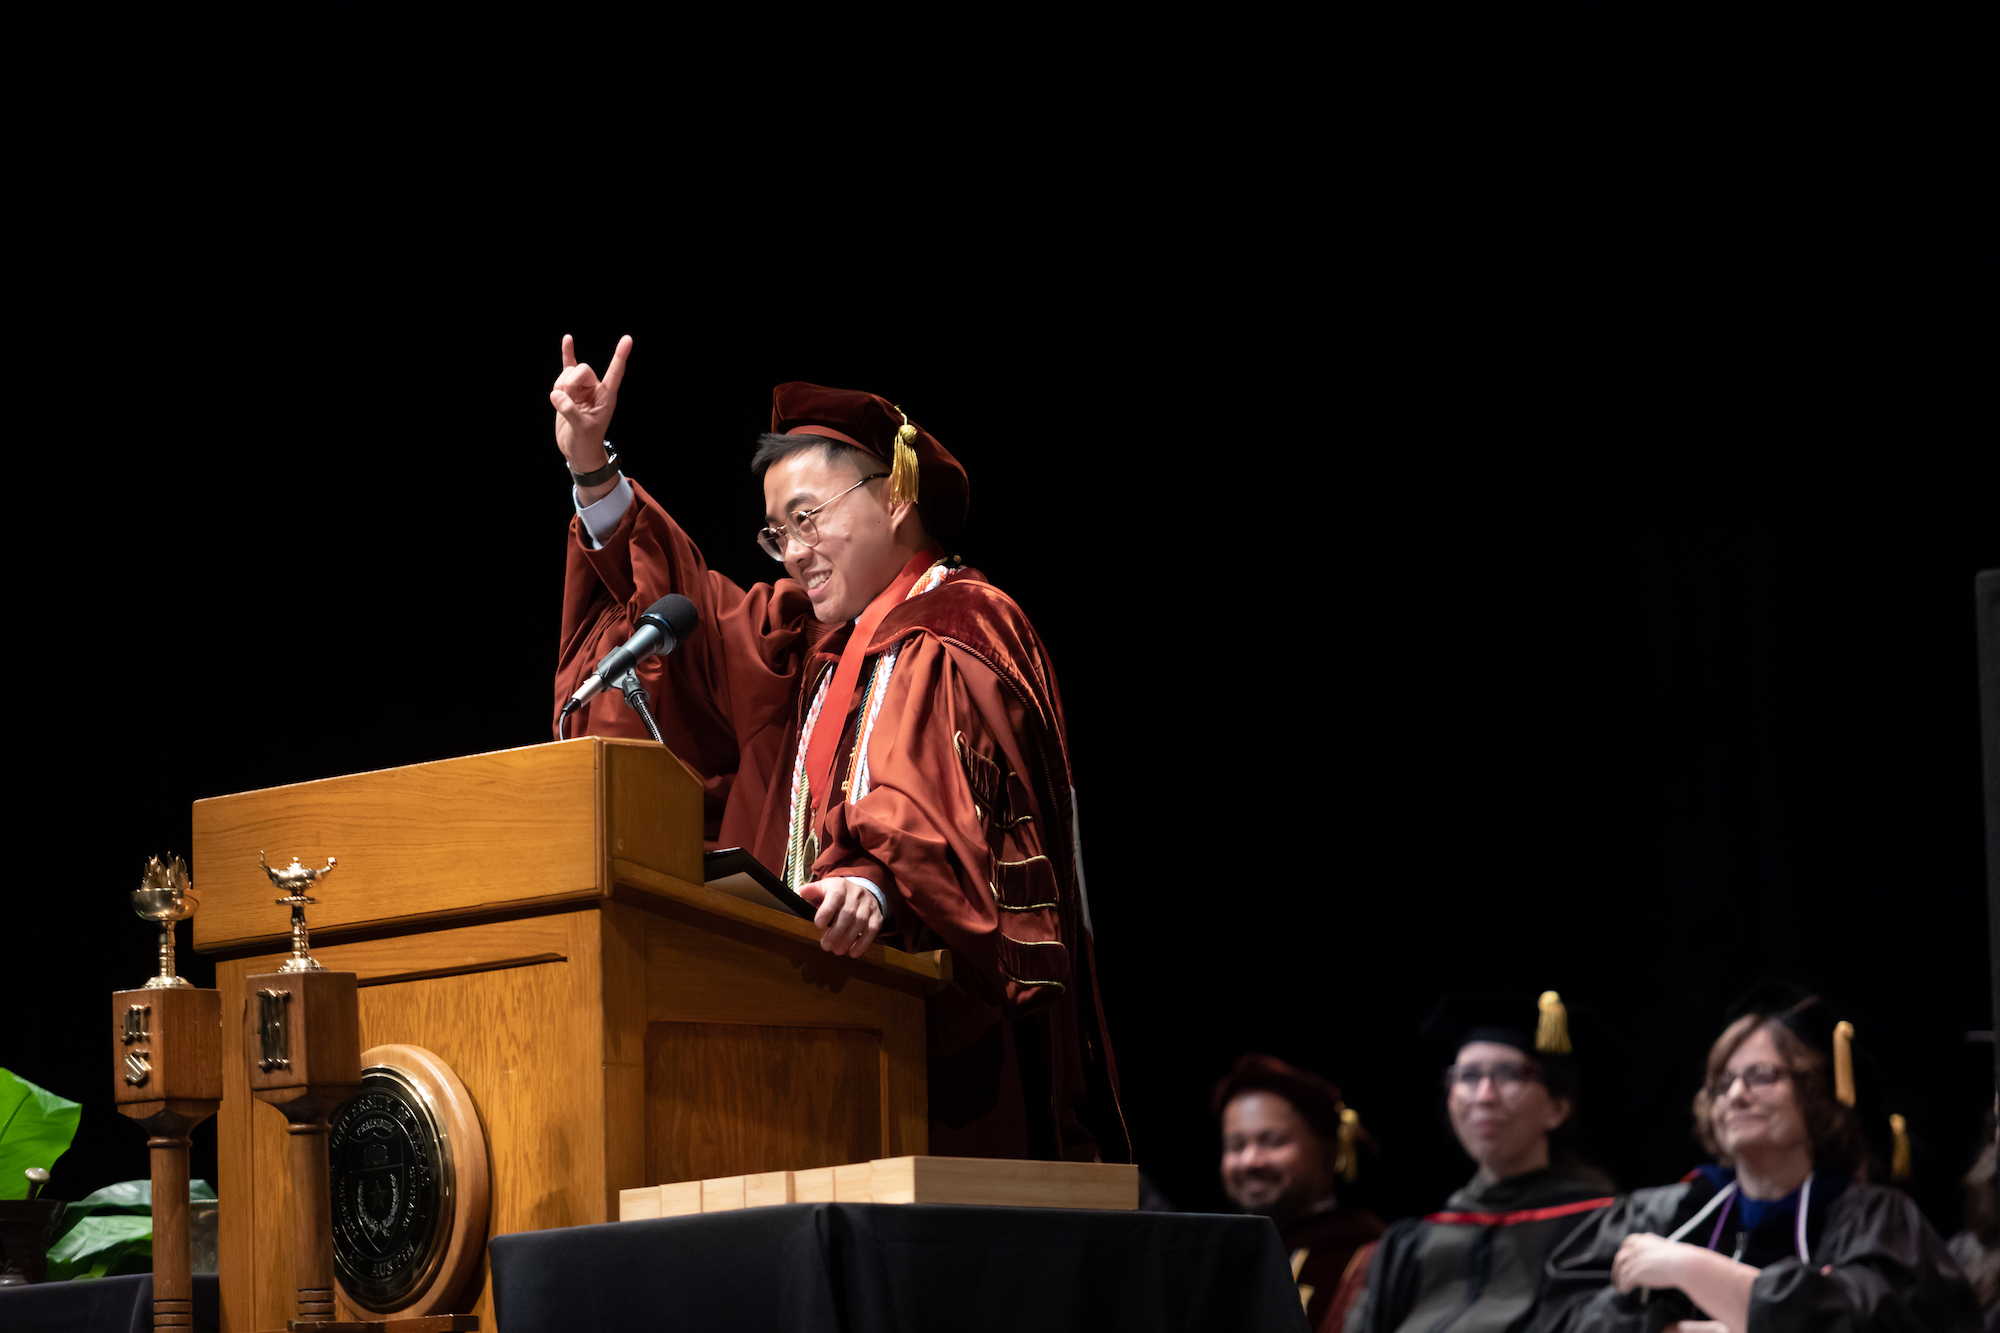 A man wearing a cap and gown at a podium and giving the Hook 'em Horns hand gesture.